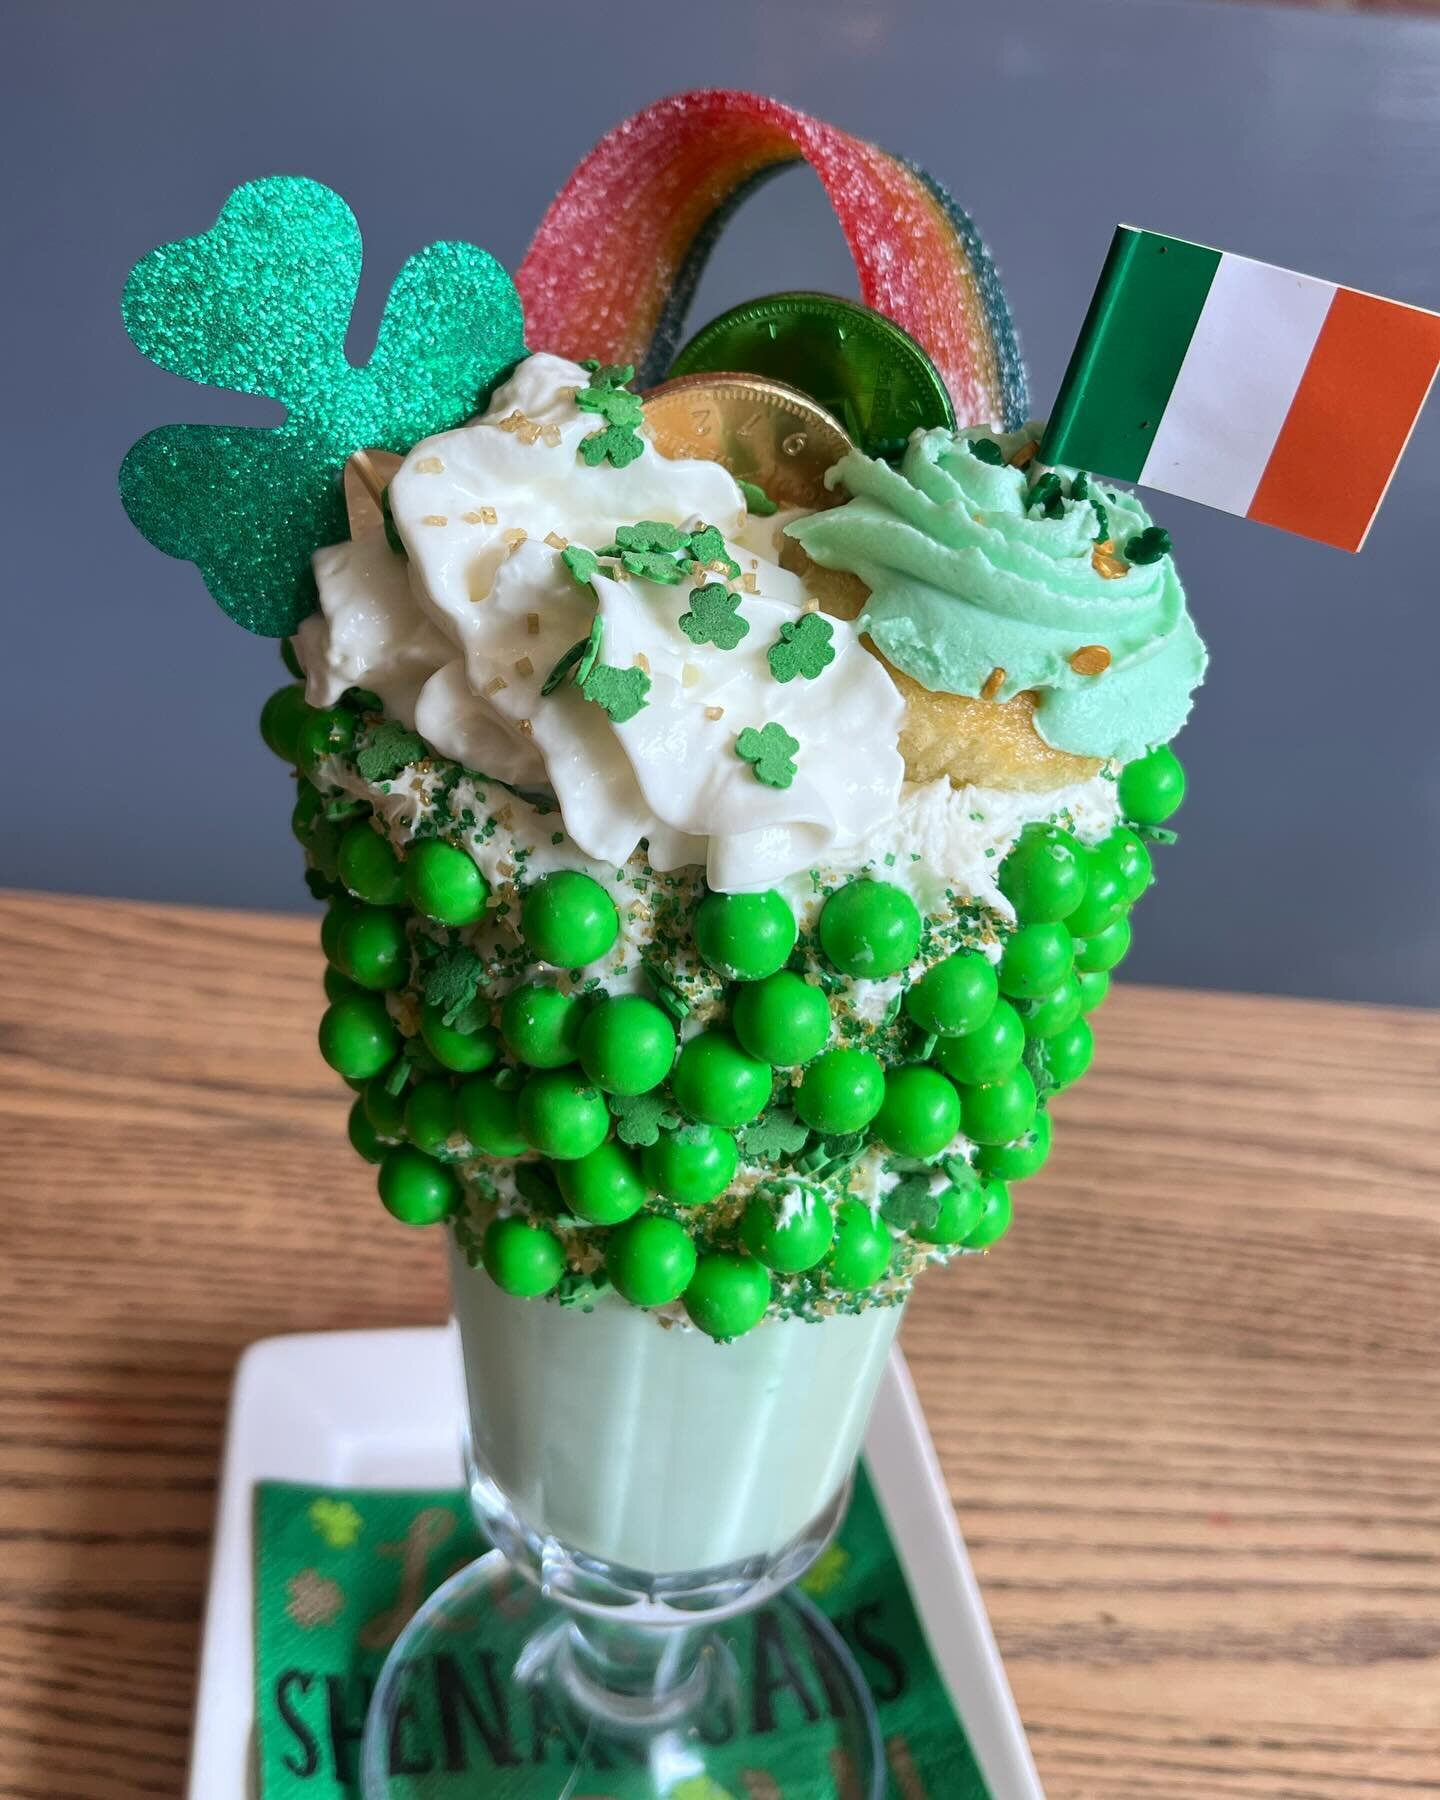 It&rsquo;s magically delicious! And it is @santafeburgerbar all weekend long. Stop over for some shenanigans and a St Patrick&rsquo;s Day Amazing Shake.  #stpatricksday #irish #stpattysday #green #ireland #luckoftheirish #stpaddysday #shamrock #happy